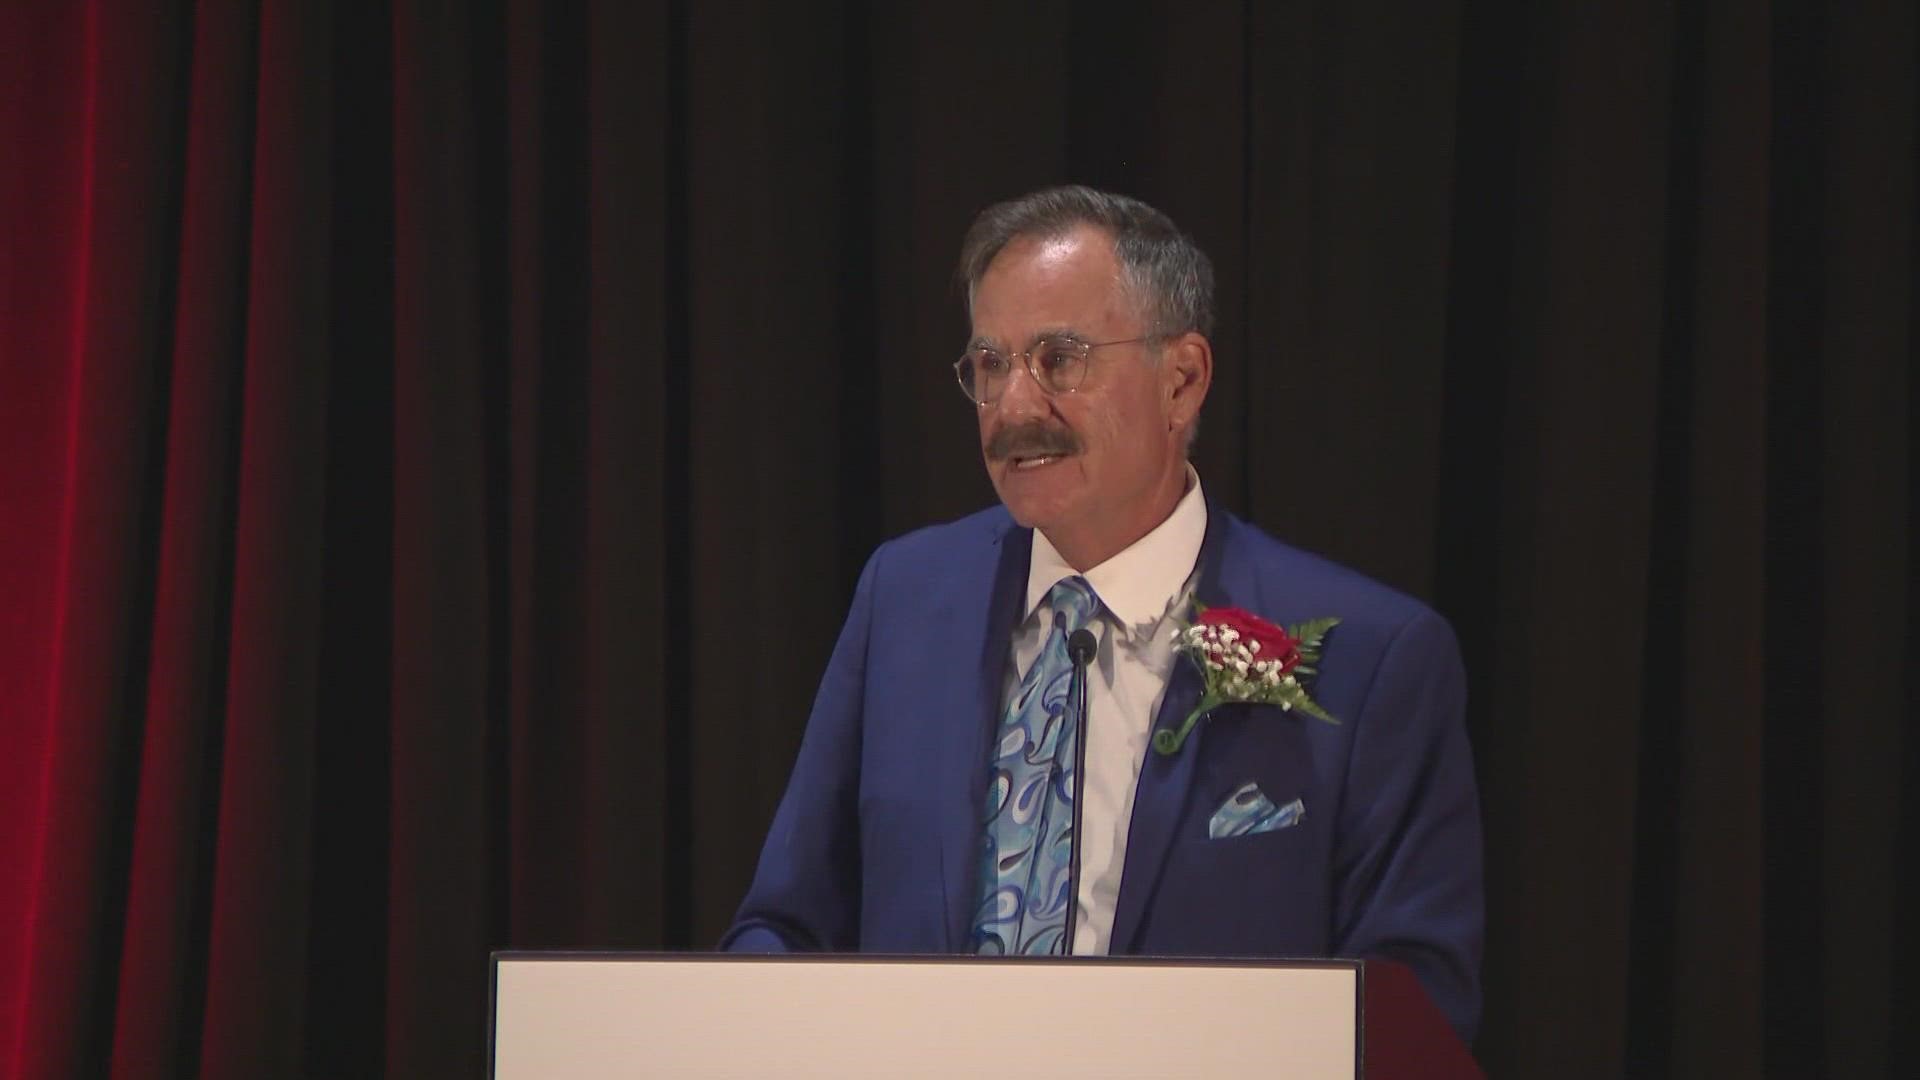 Long-time 12News anchor Mark Curtis has covered just about every big story in Arizona over the last 20 years, and now he's being honored for his service.